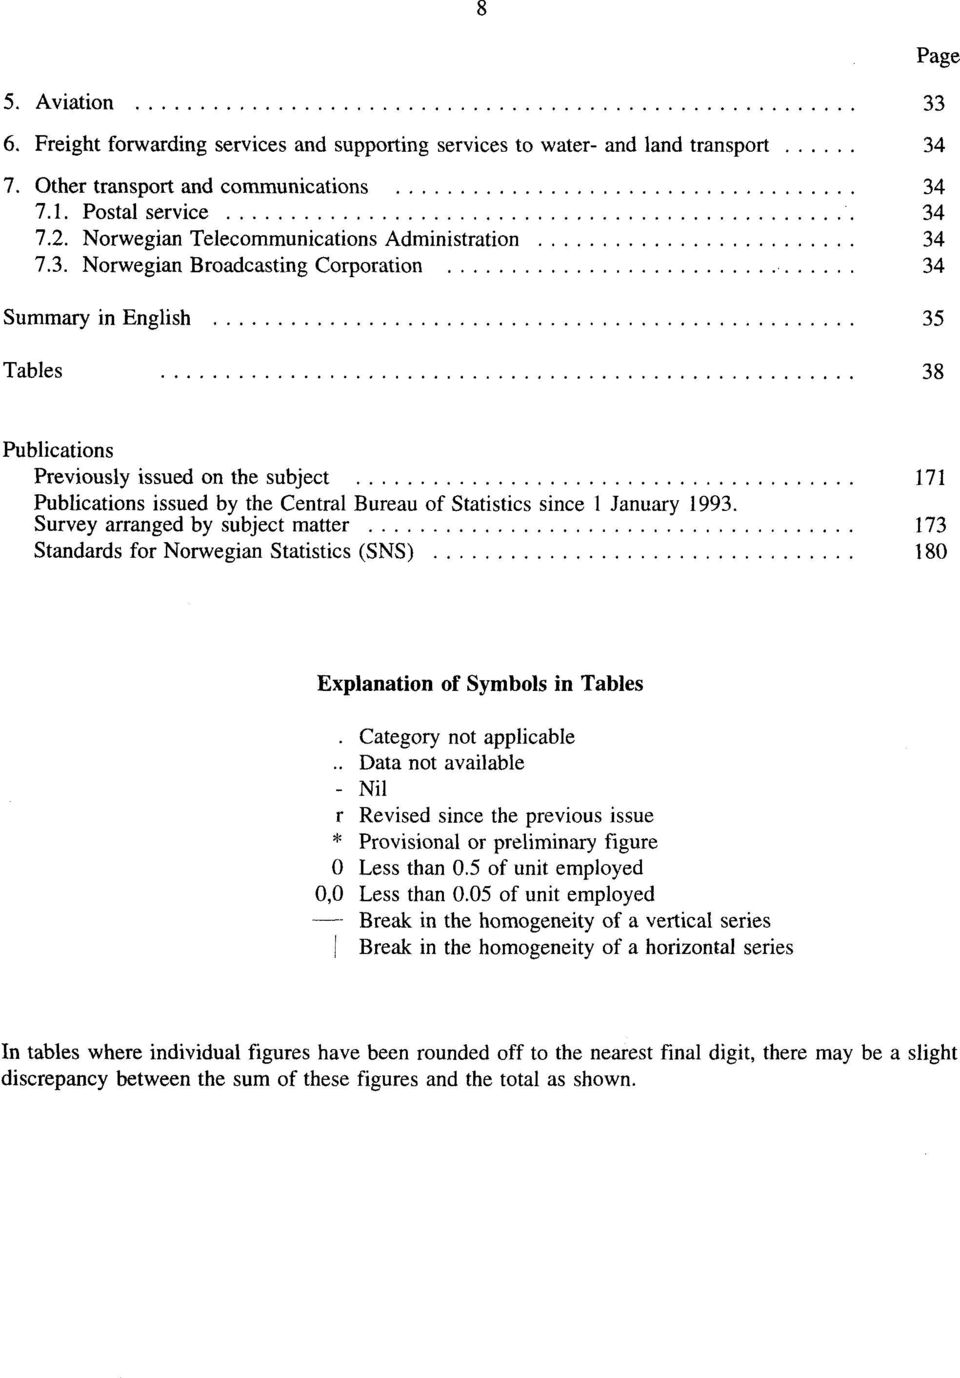 7.3. Norwegian Broadcasting Corporation 34 Summary in English 35 Tables 38 Page Publications Previously issued on the subject 171 Publications issued by the Central Bureau of Statistics since 1